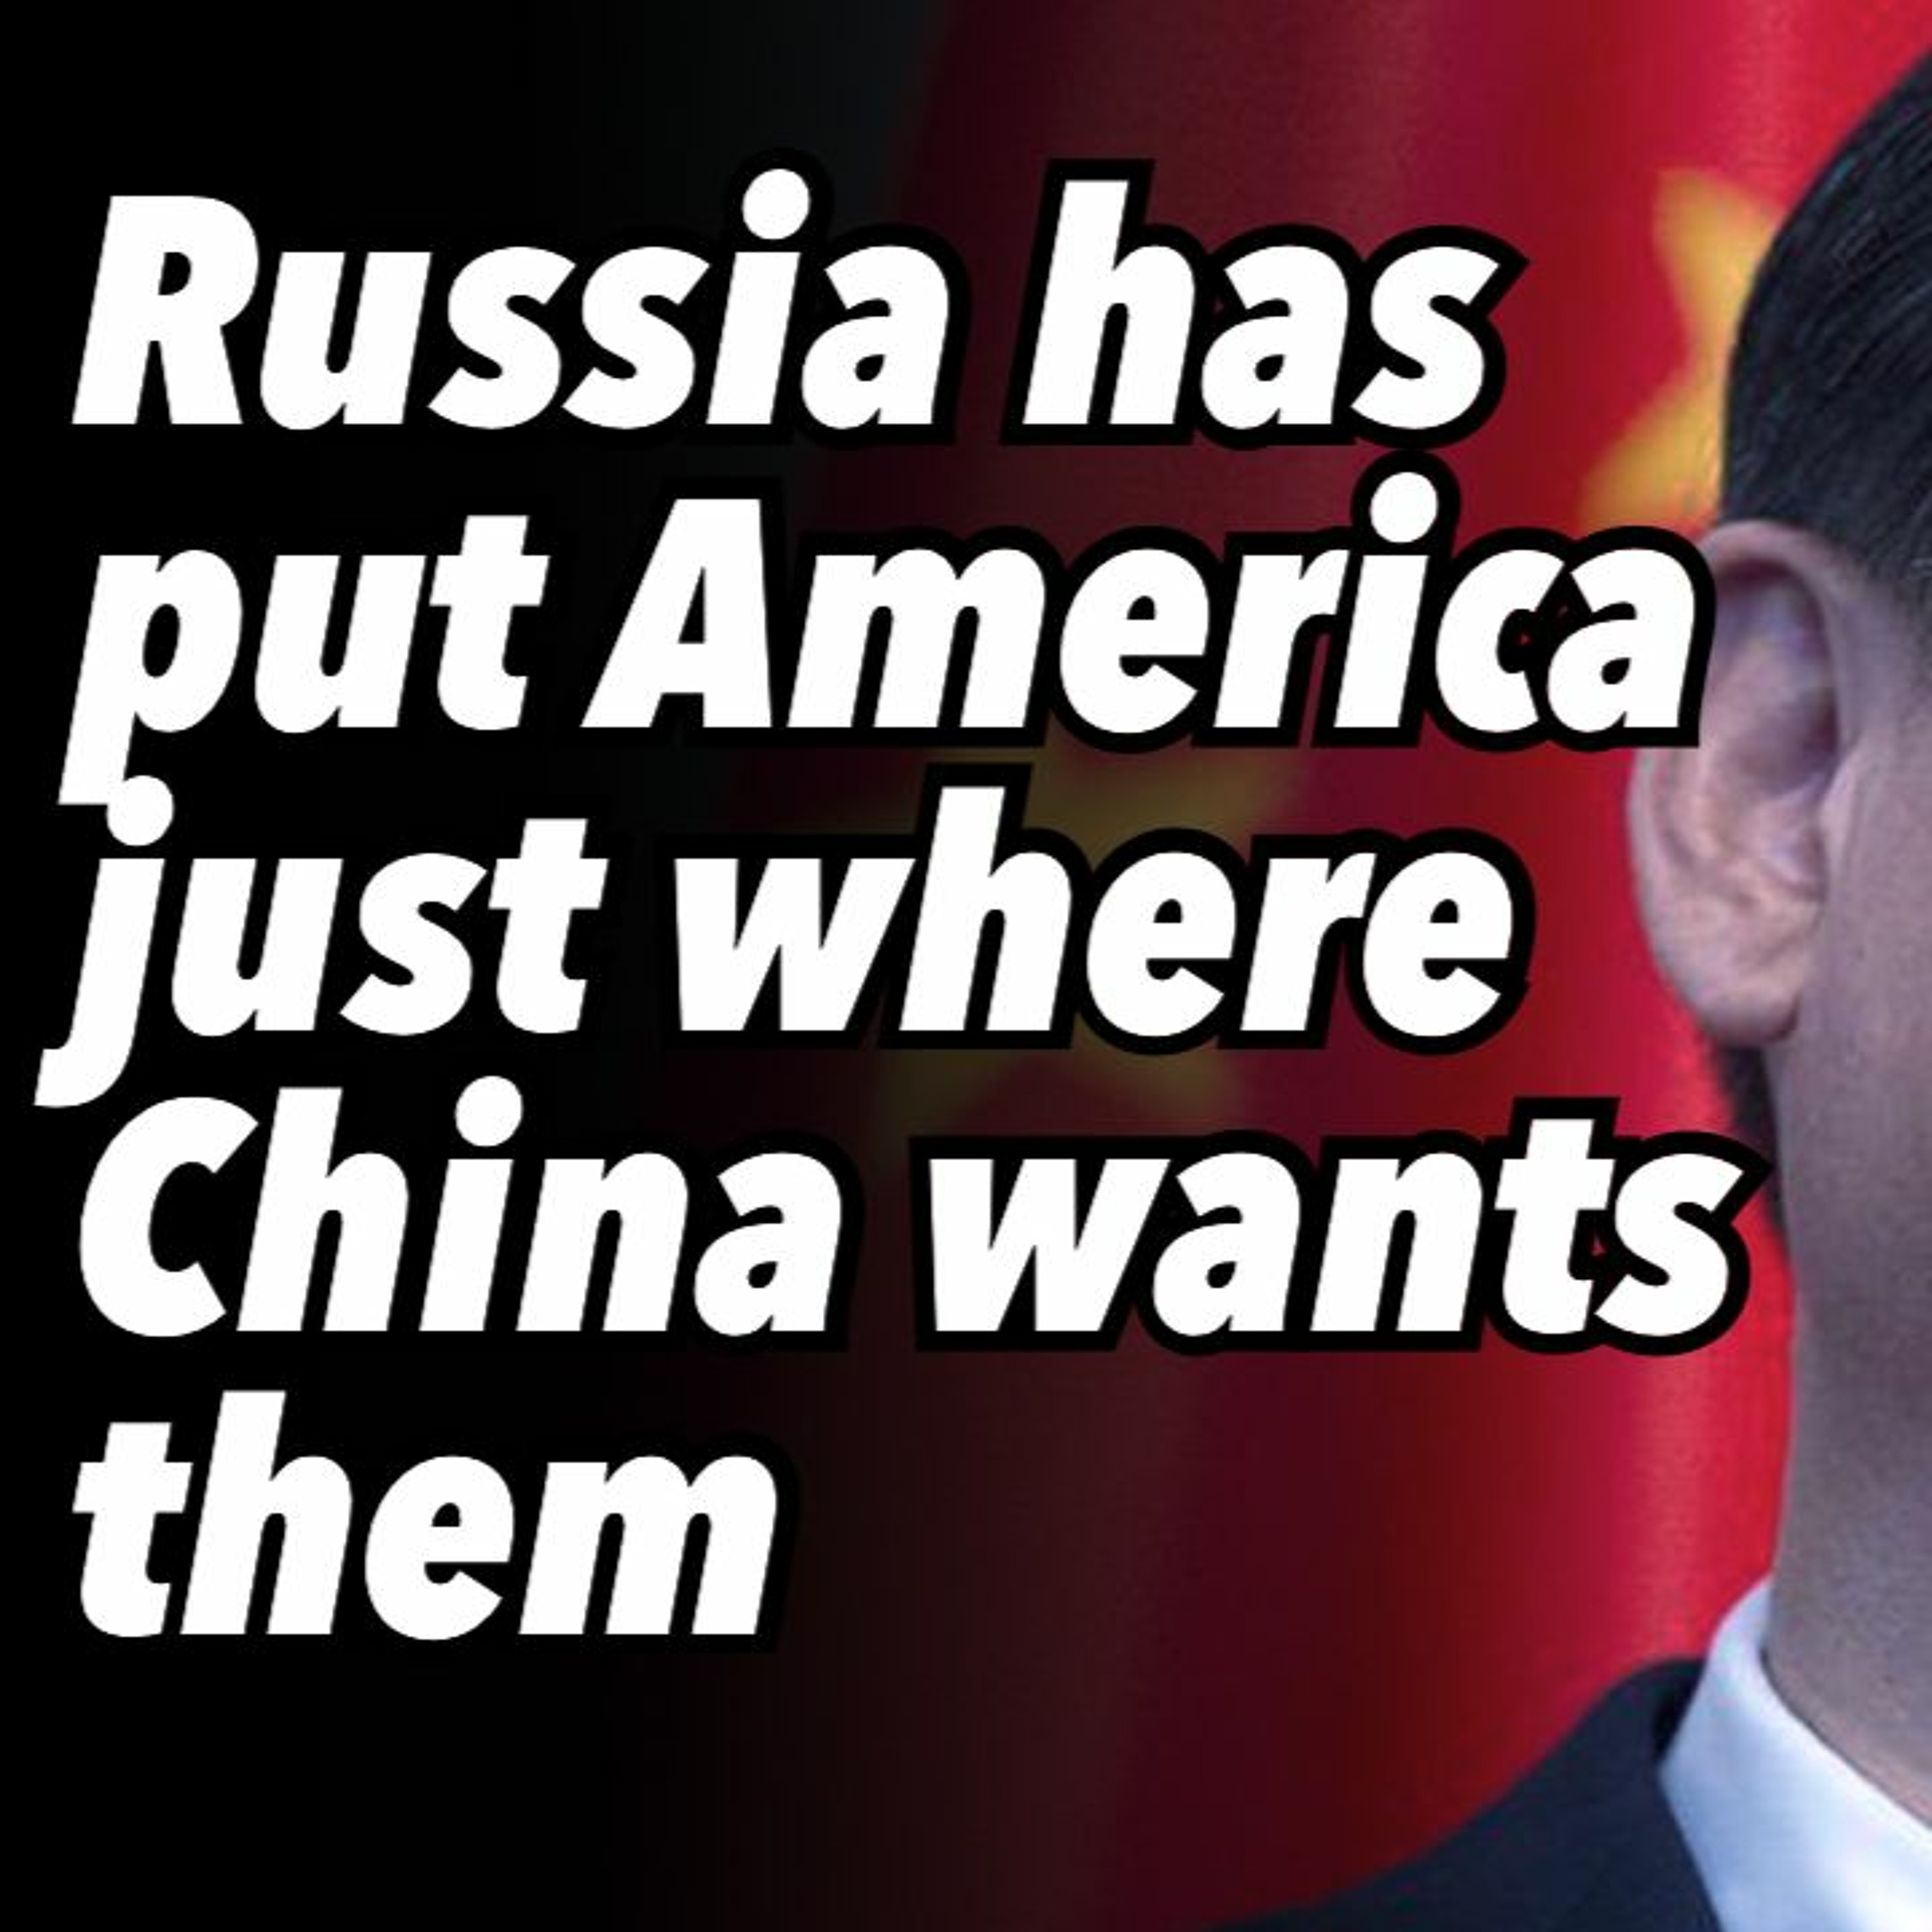 Russia has put America just where China wants them